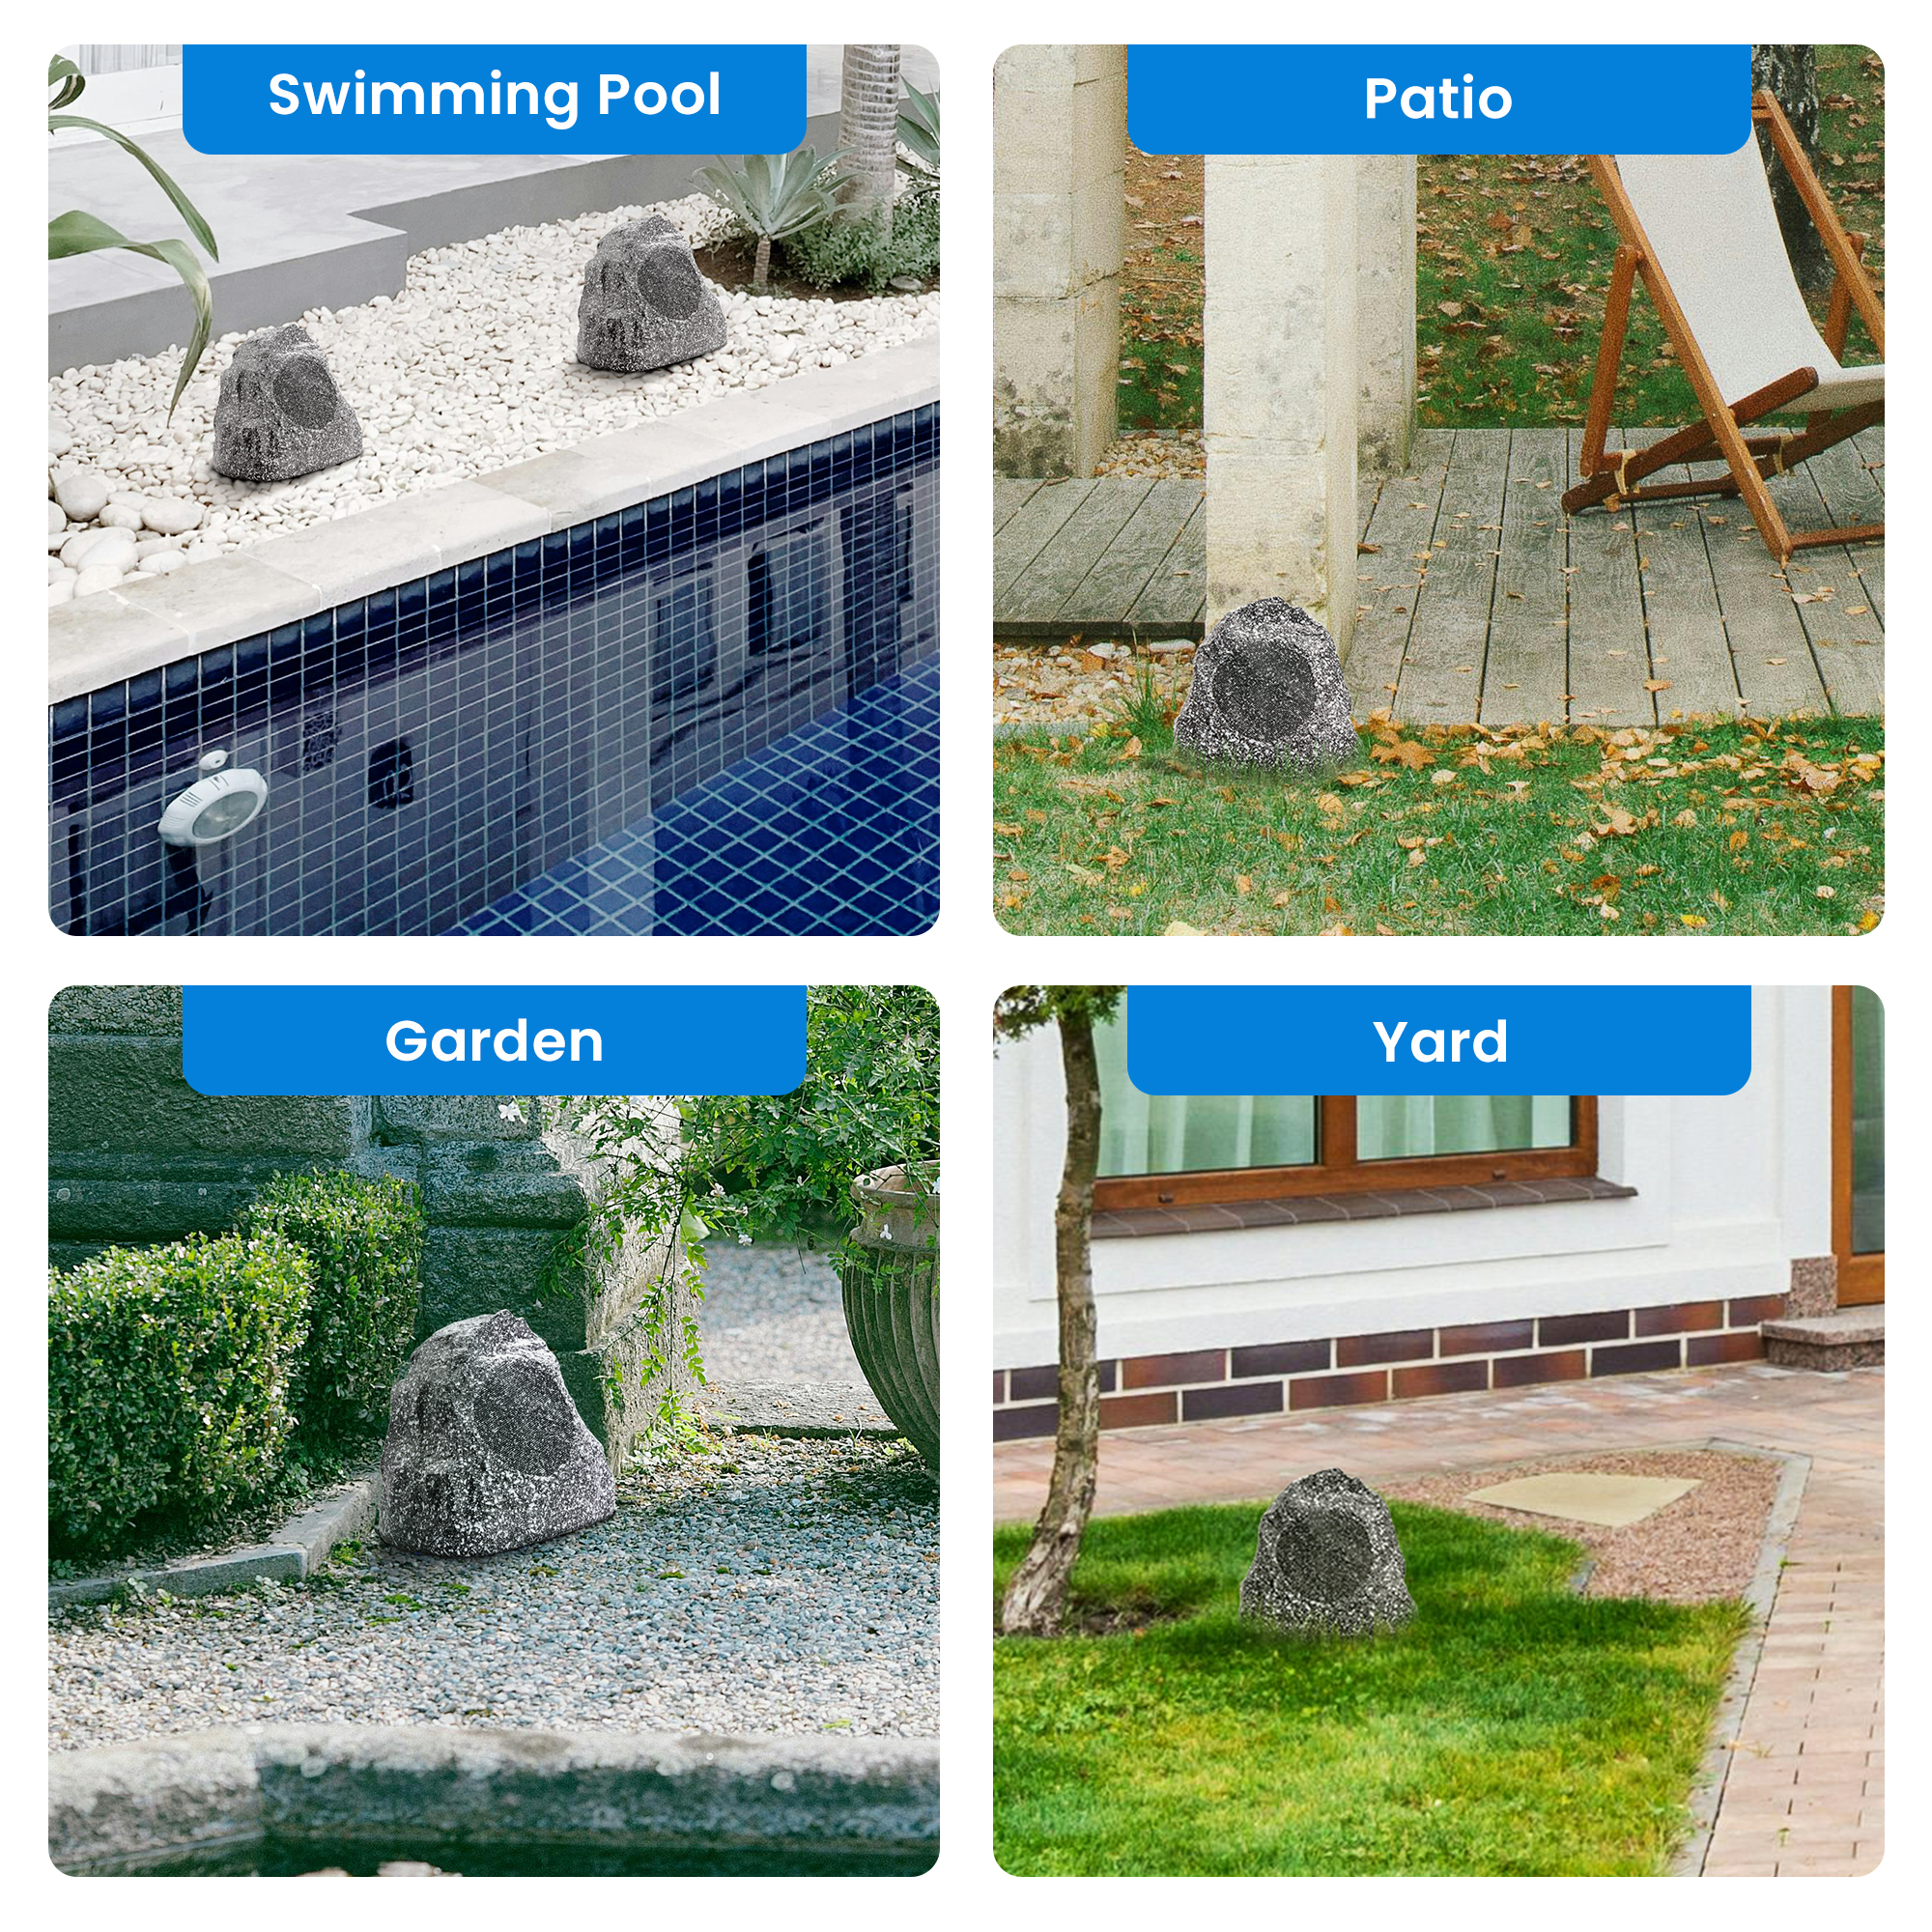 Theater Solutions 2R4G Outdoor Granite Rock 2 Speaker Set for Deck Pool Spa Patio Garden - image 5 of 7